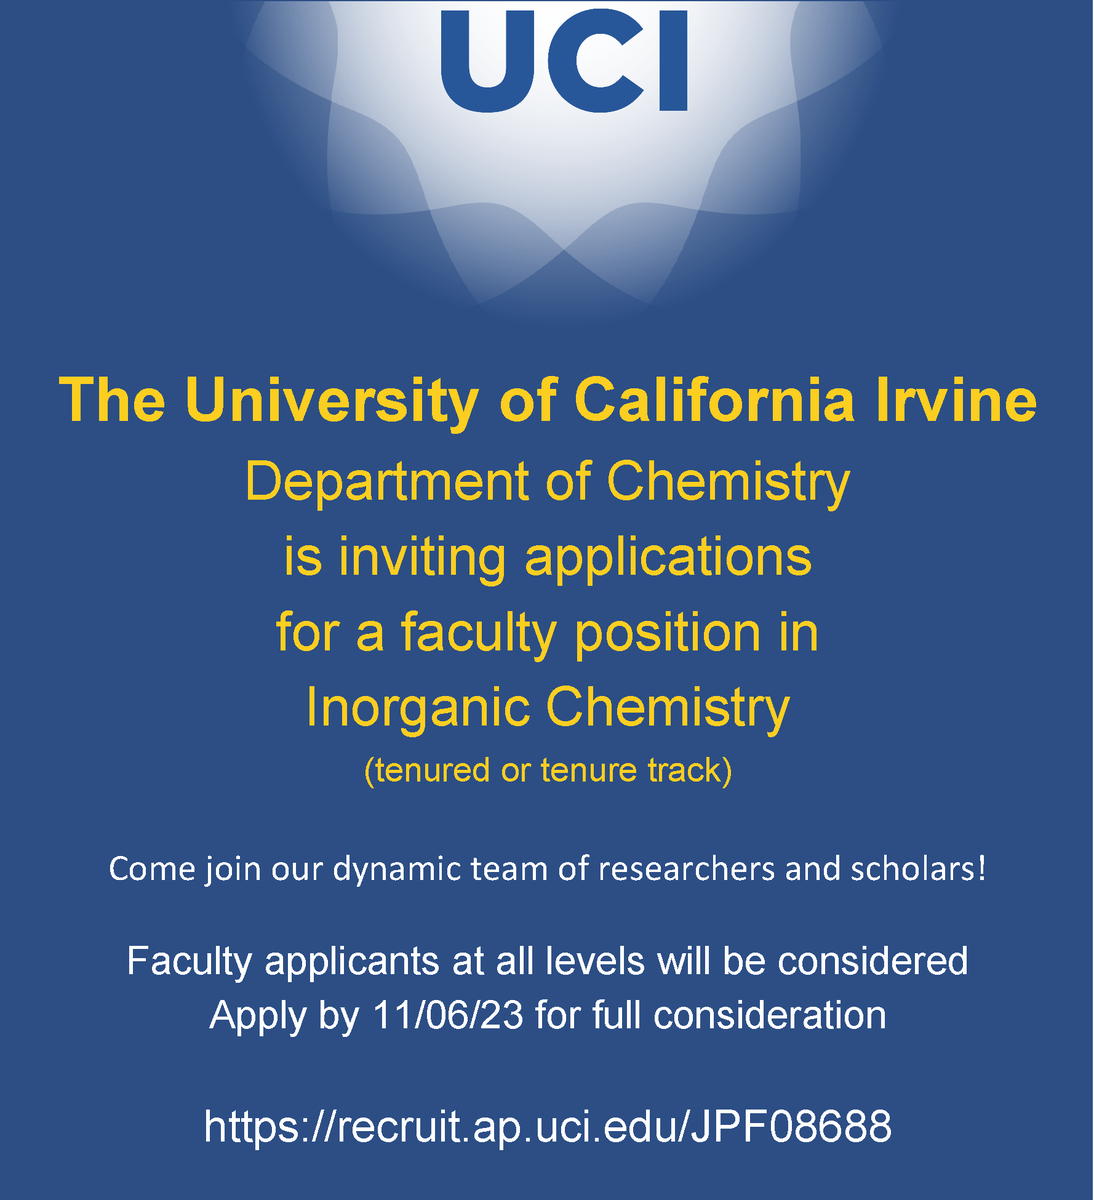 UCI Chemistry is hiring a faculty member in Inorganic Chemistry! recruit.ap.uci.edu/JPF08688